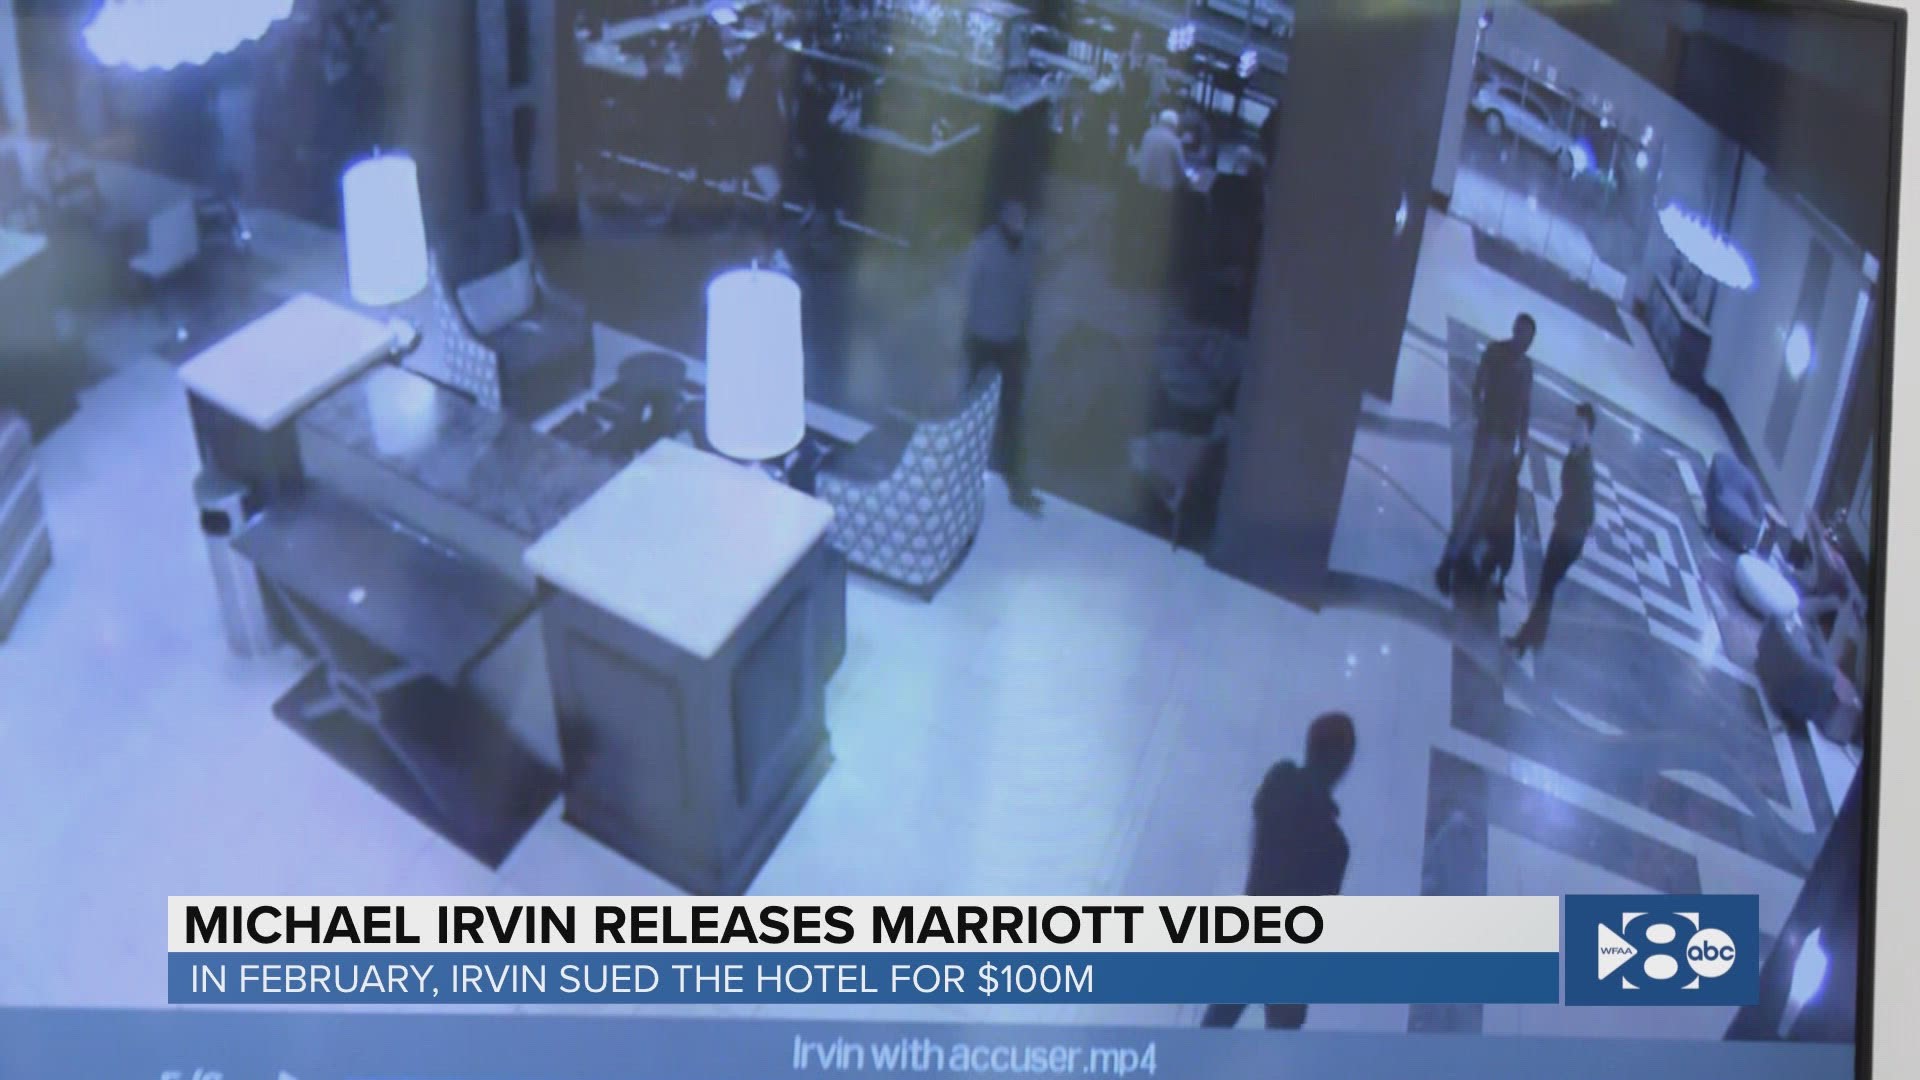 Irvin has adamantly denied any wrongdoing in the case, though Marriott alleged that Irvin touched a hotel employee's arm without her consent.